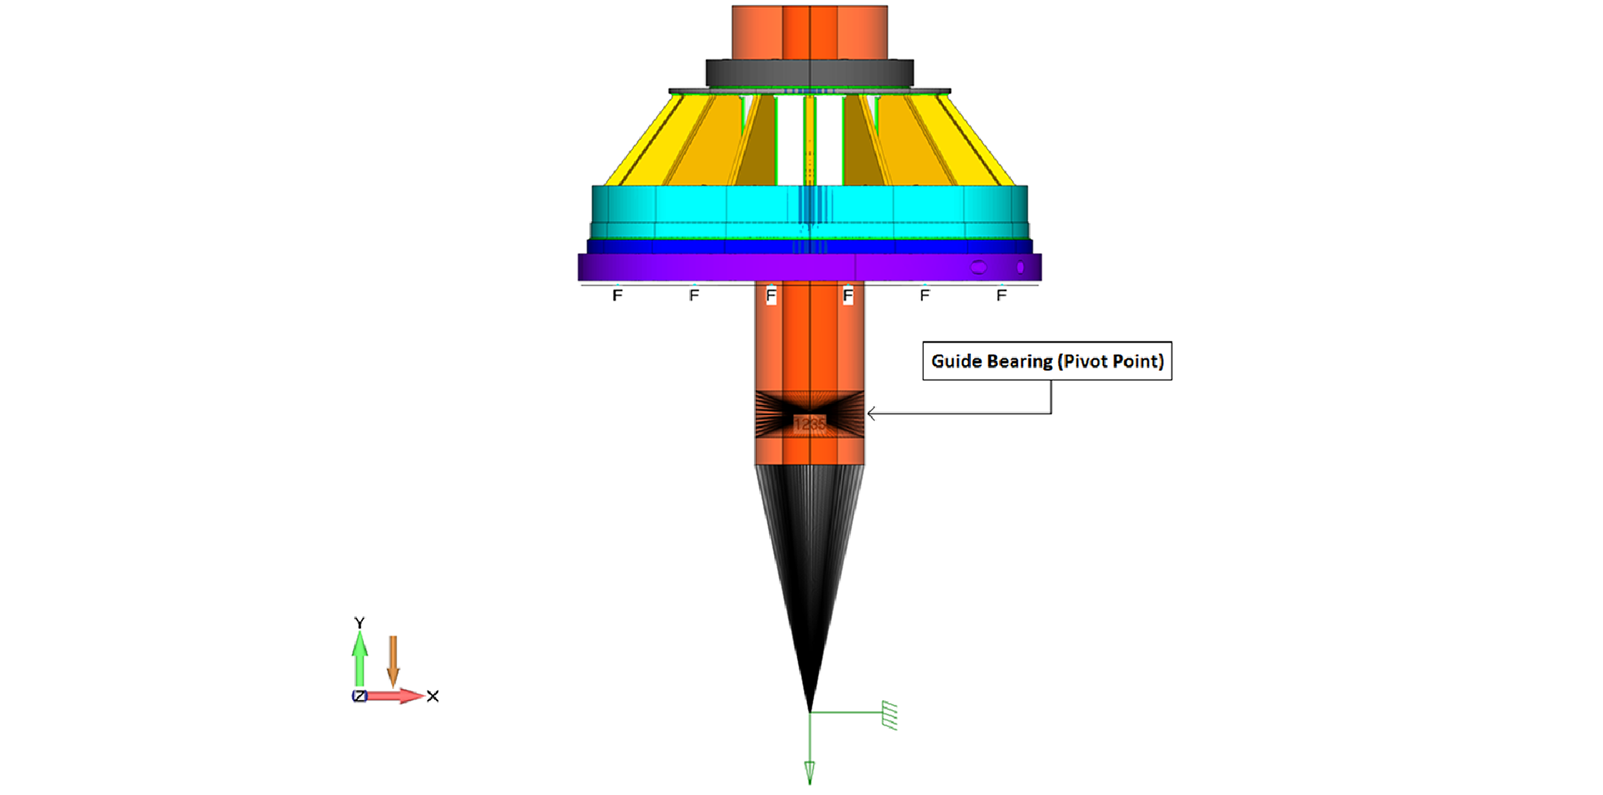 Complex, System Level FEA of Hydroelectric Generator Shaft - FEA Consulting Services - USA